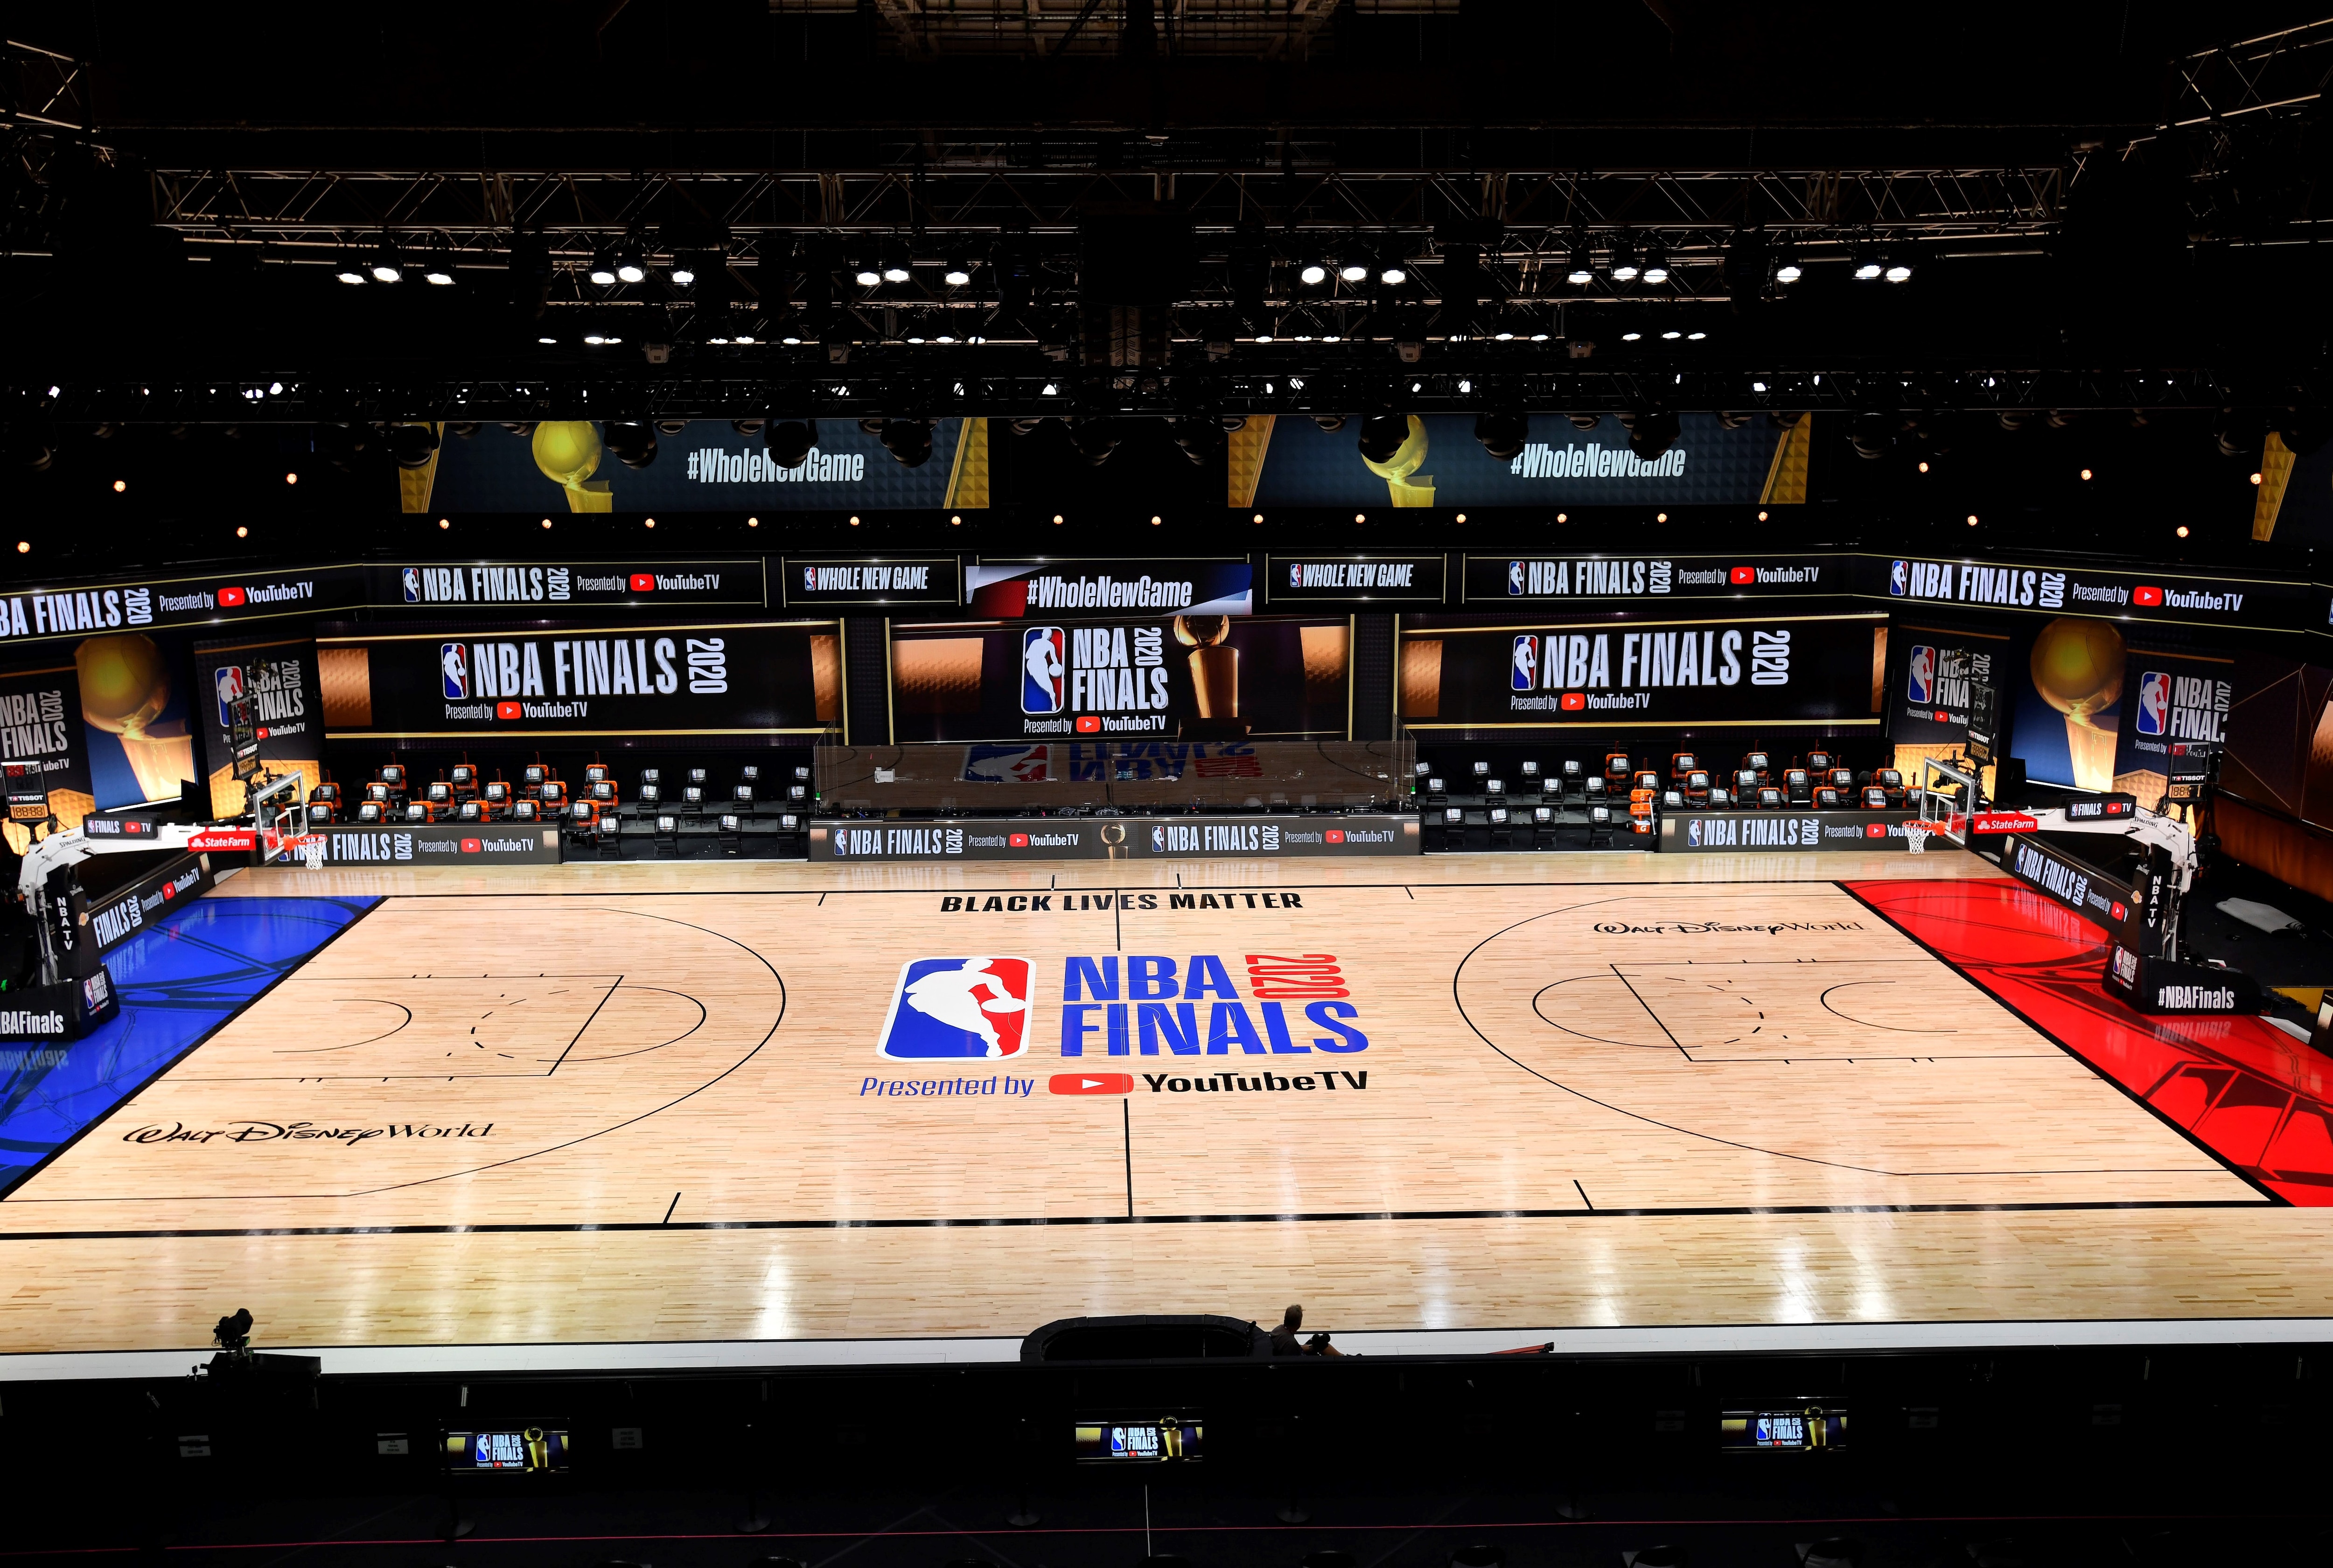 LOOK: The court for the NBA Finals 3